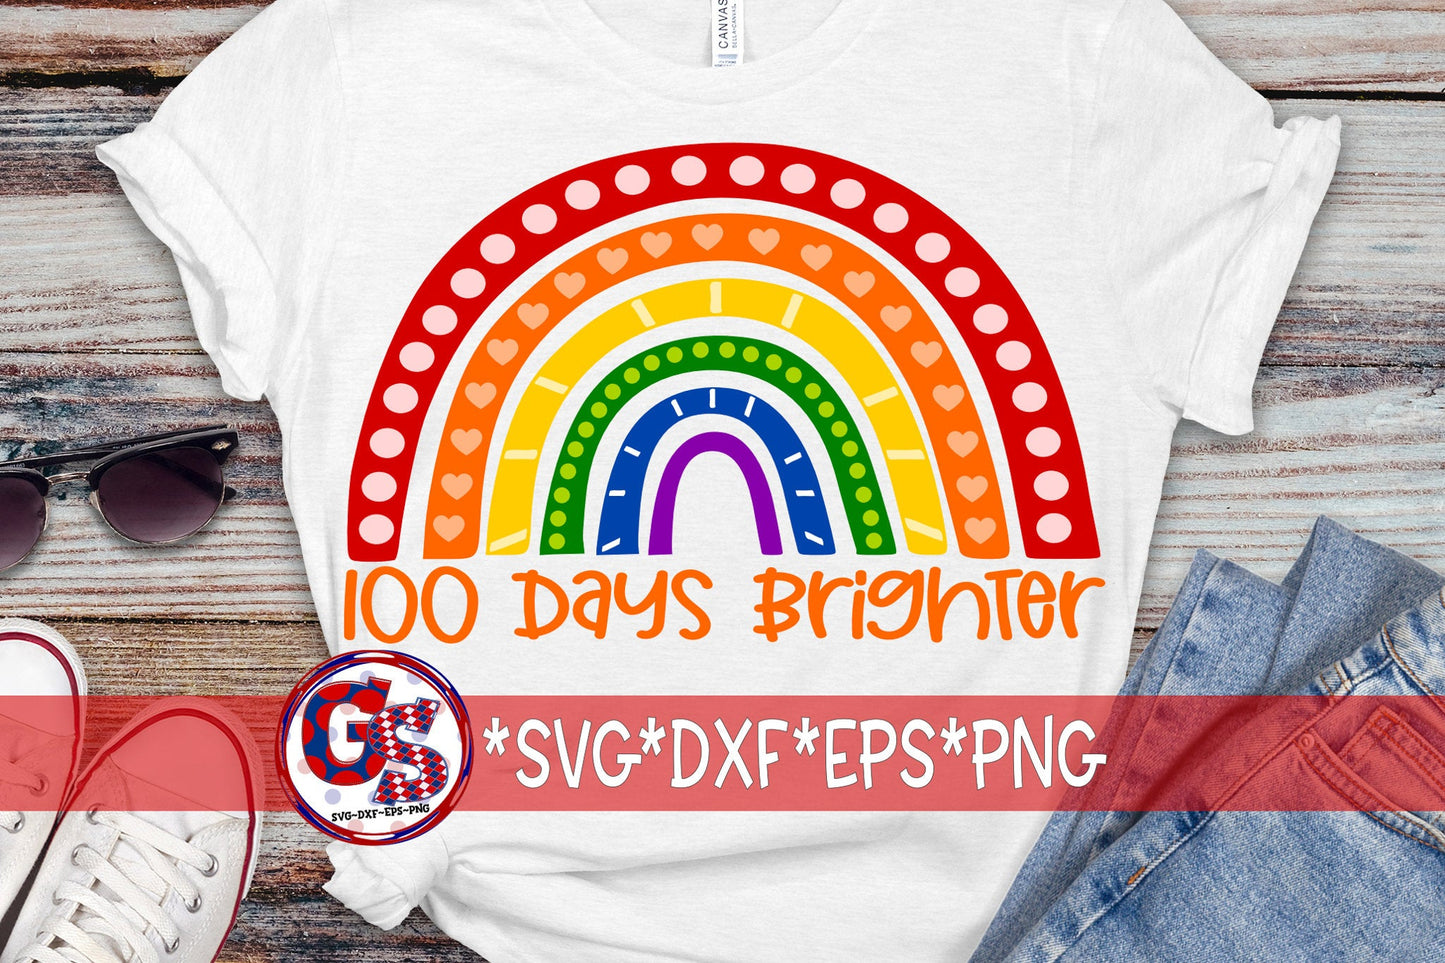 100 Days Brighter svg dxf eps png. 100 Days Of School SvG | 100 Days Rainbow SvG | School SvG | Rainbow SvG | Instant Download Cut Files